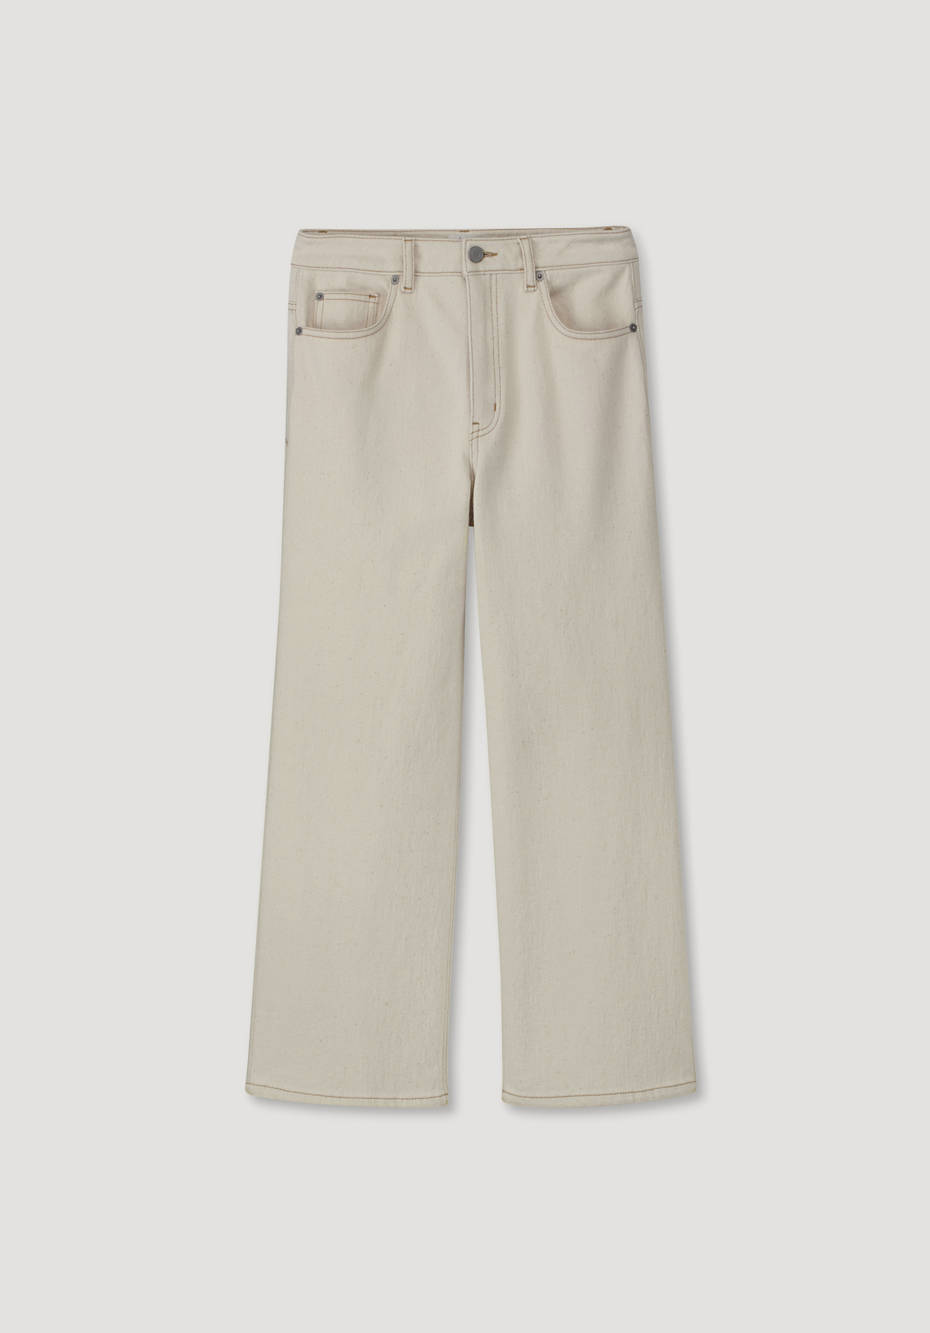 Jeans culottes made from organic denim with hemp